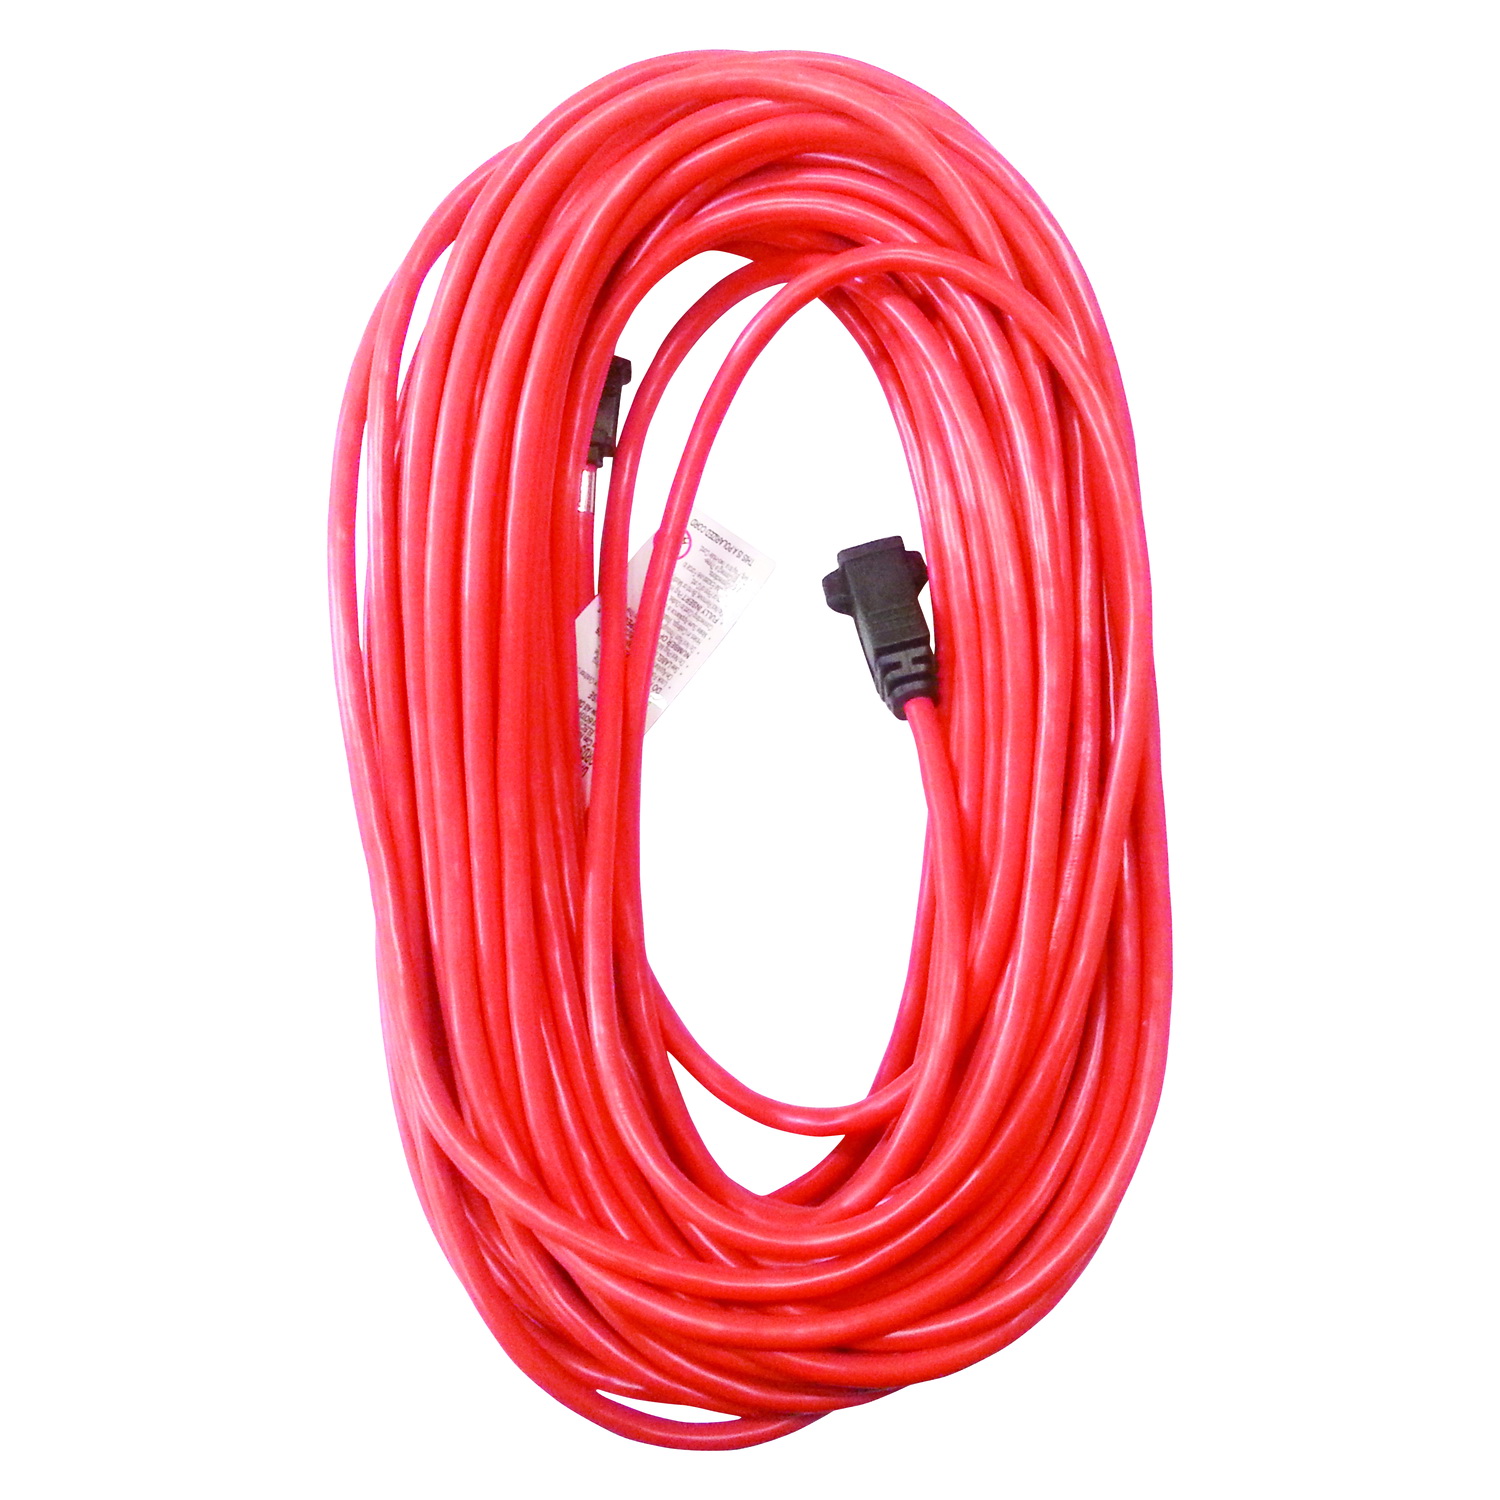 ACE 30981 Outdoor Extension Cord, 16 AWG Cable, 100 ft L, 10 A, 125 V, Orange - 1